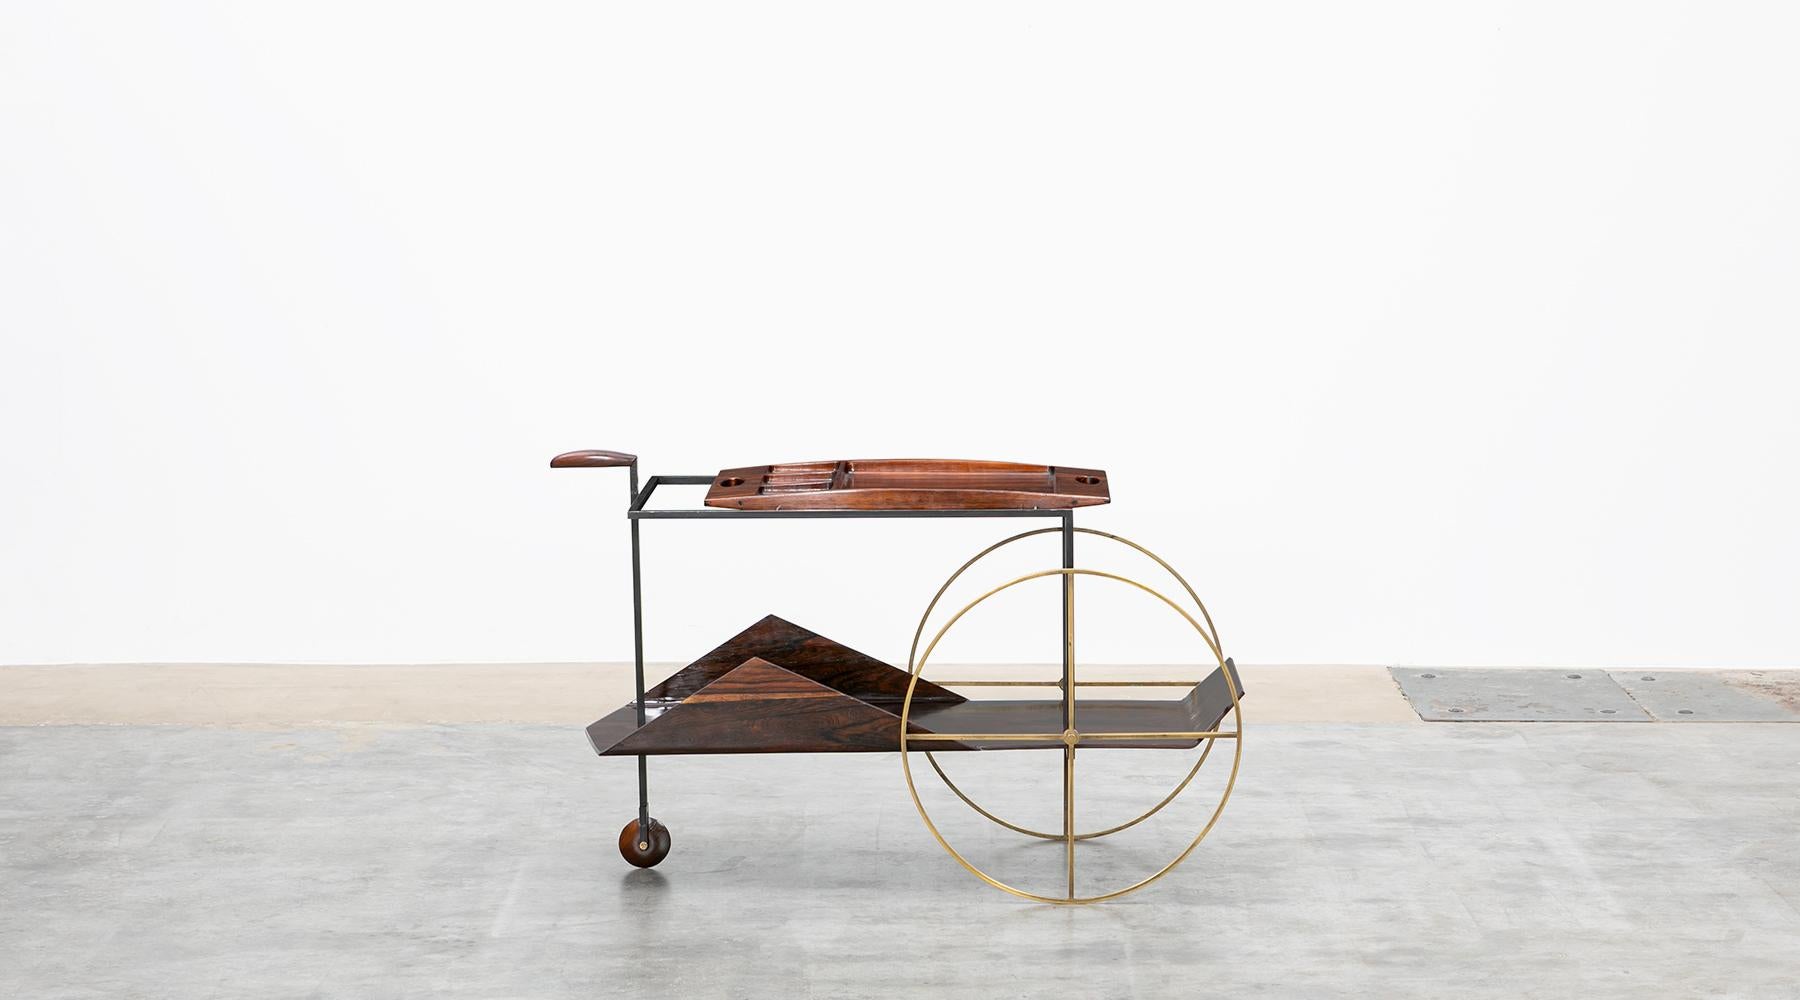 This Brazilian modern classic piece was designed in 1959 by Jorge Zalszupin. The exquisite barcart is made if wood with brass wheels. The top shelf is a removable tray. Noble lines, the essential use of native wood and a combination of impeccable